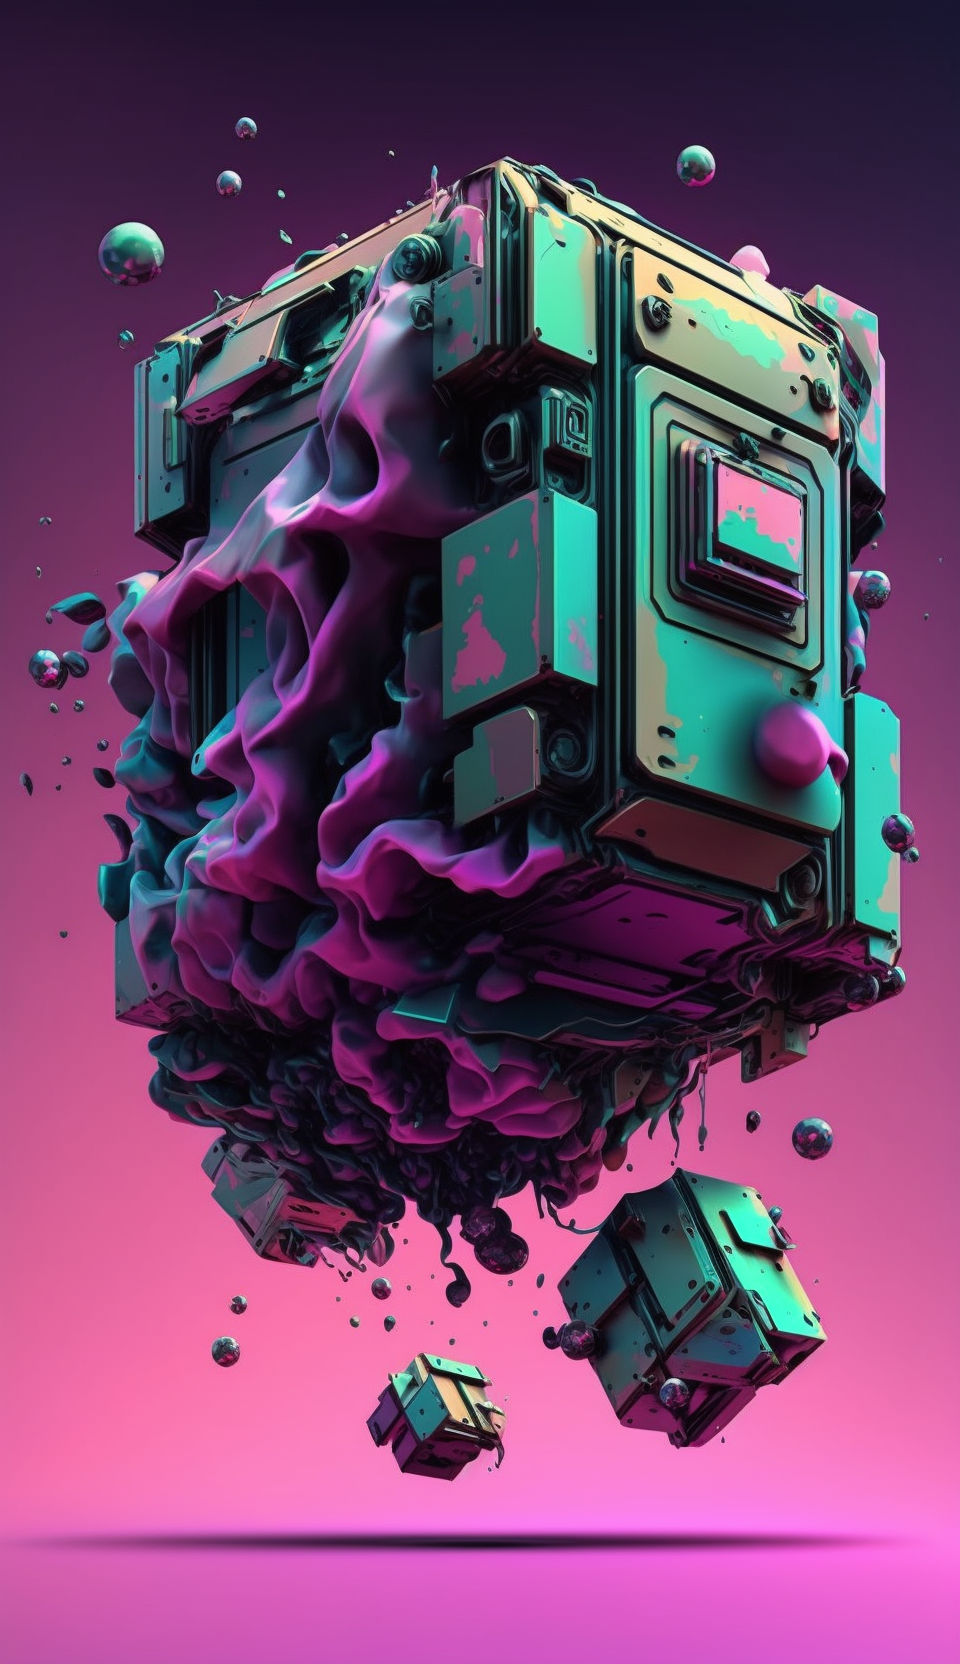 soupcan13_floating_hyper_detailed_mechanical_cubes_vaporwave_co_8acee3a3-df0b-4bdb-9bc7-8855eac92114.png